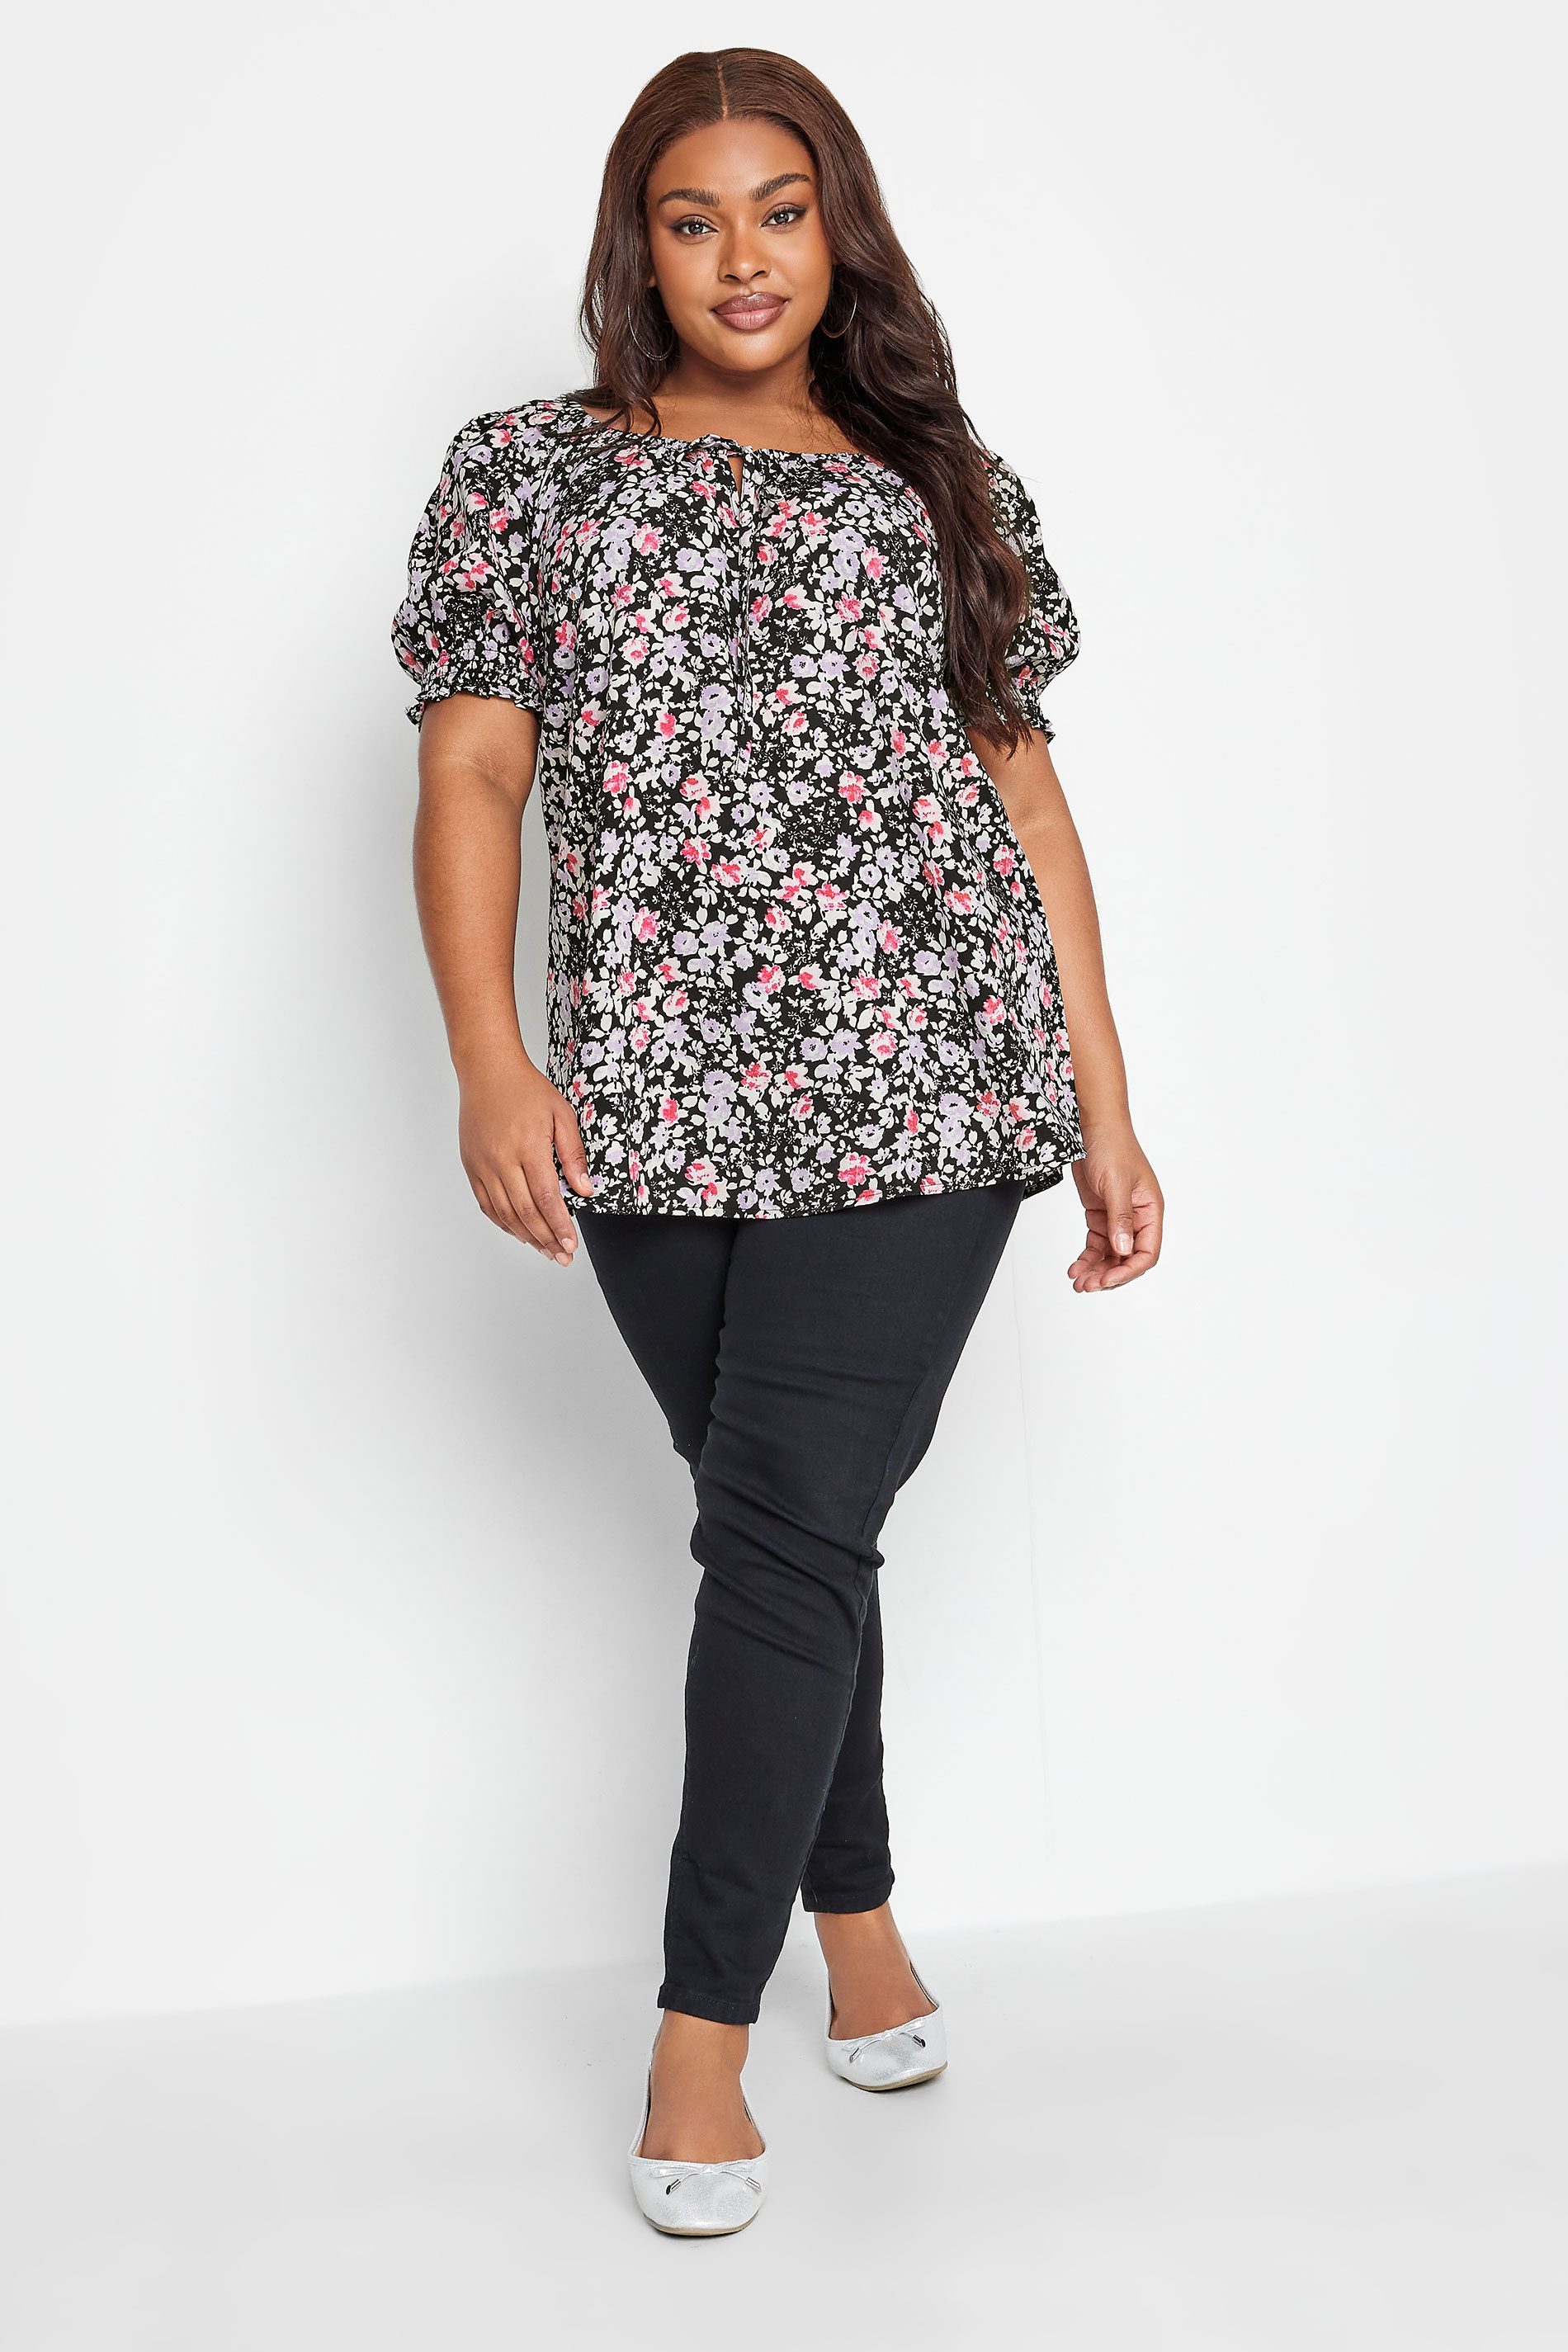 YOURS Plus Size Black & Pink Floral Print Gypsy Top | Yours Clothing 2